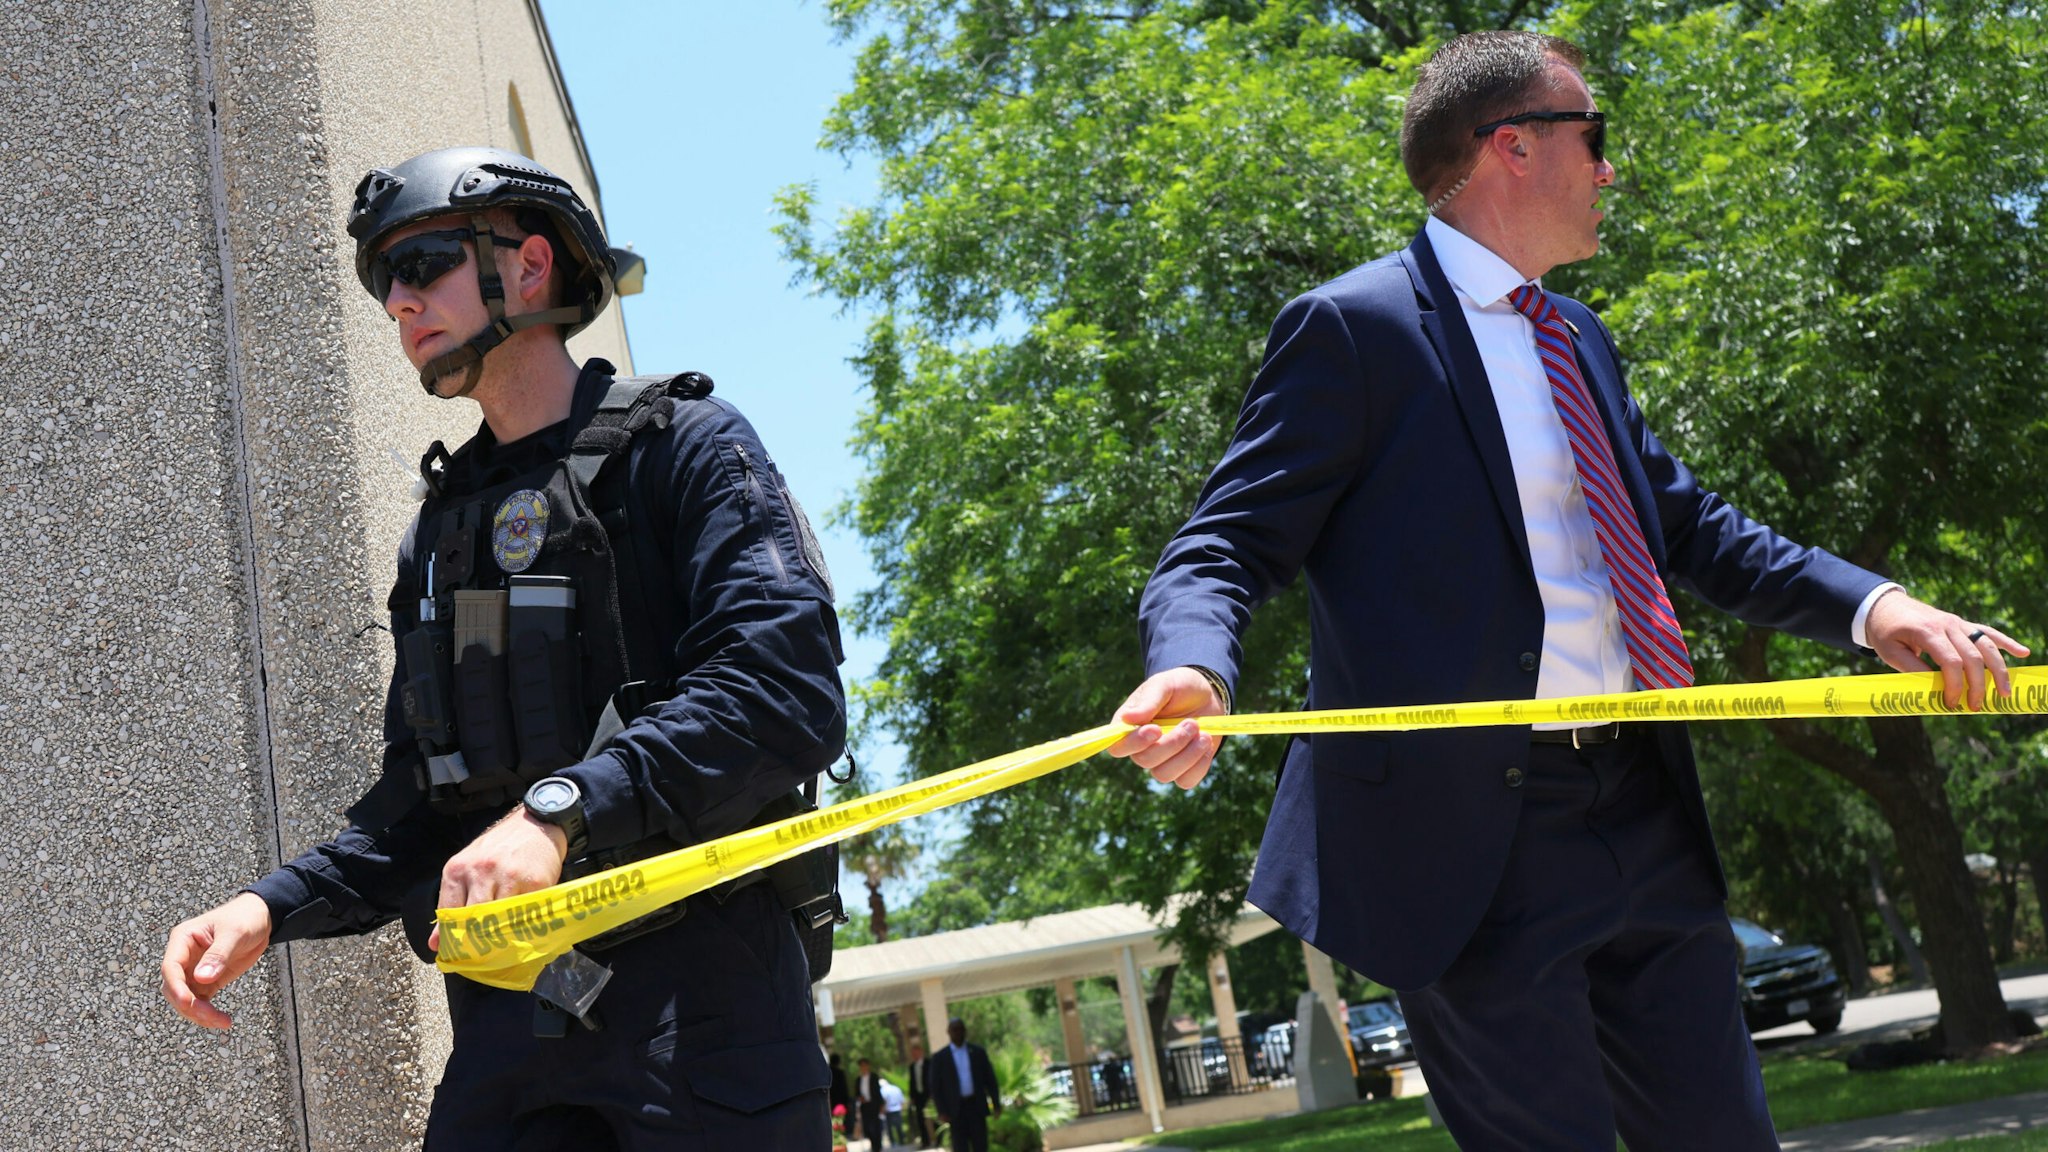 UVALDE, TEXAS - MAY 28: Law enforcement officials put up caution tape as President Joe Biden attends mass at Sacred Heart Catholic Church on May 29, 2022 in Uvalde, Texas. On May 24th, 19 children and two adults were killed during a mass shooting at Robb Elementary School after a gunman entered the school through an unlocked door and barricaded himself in a classroom where the victims were located.